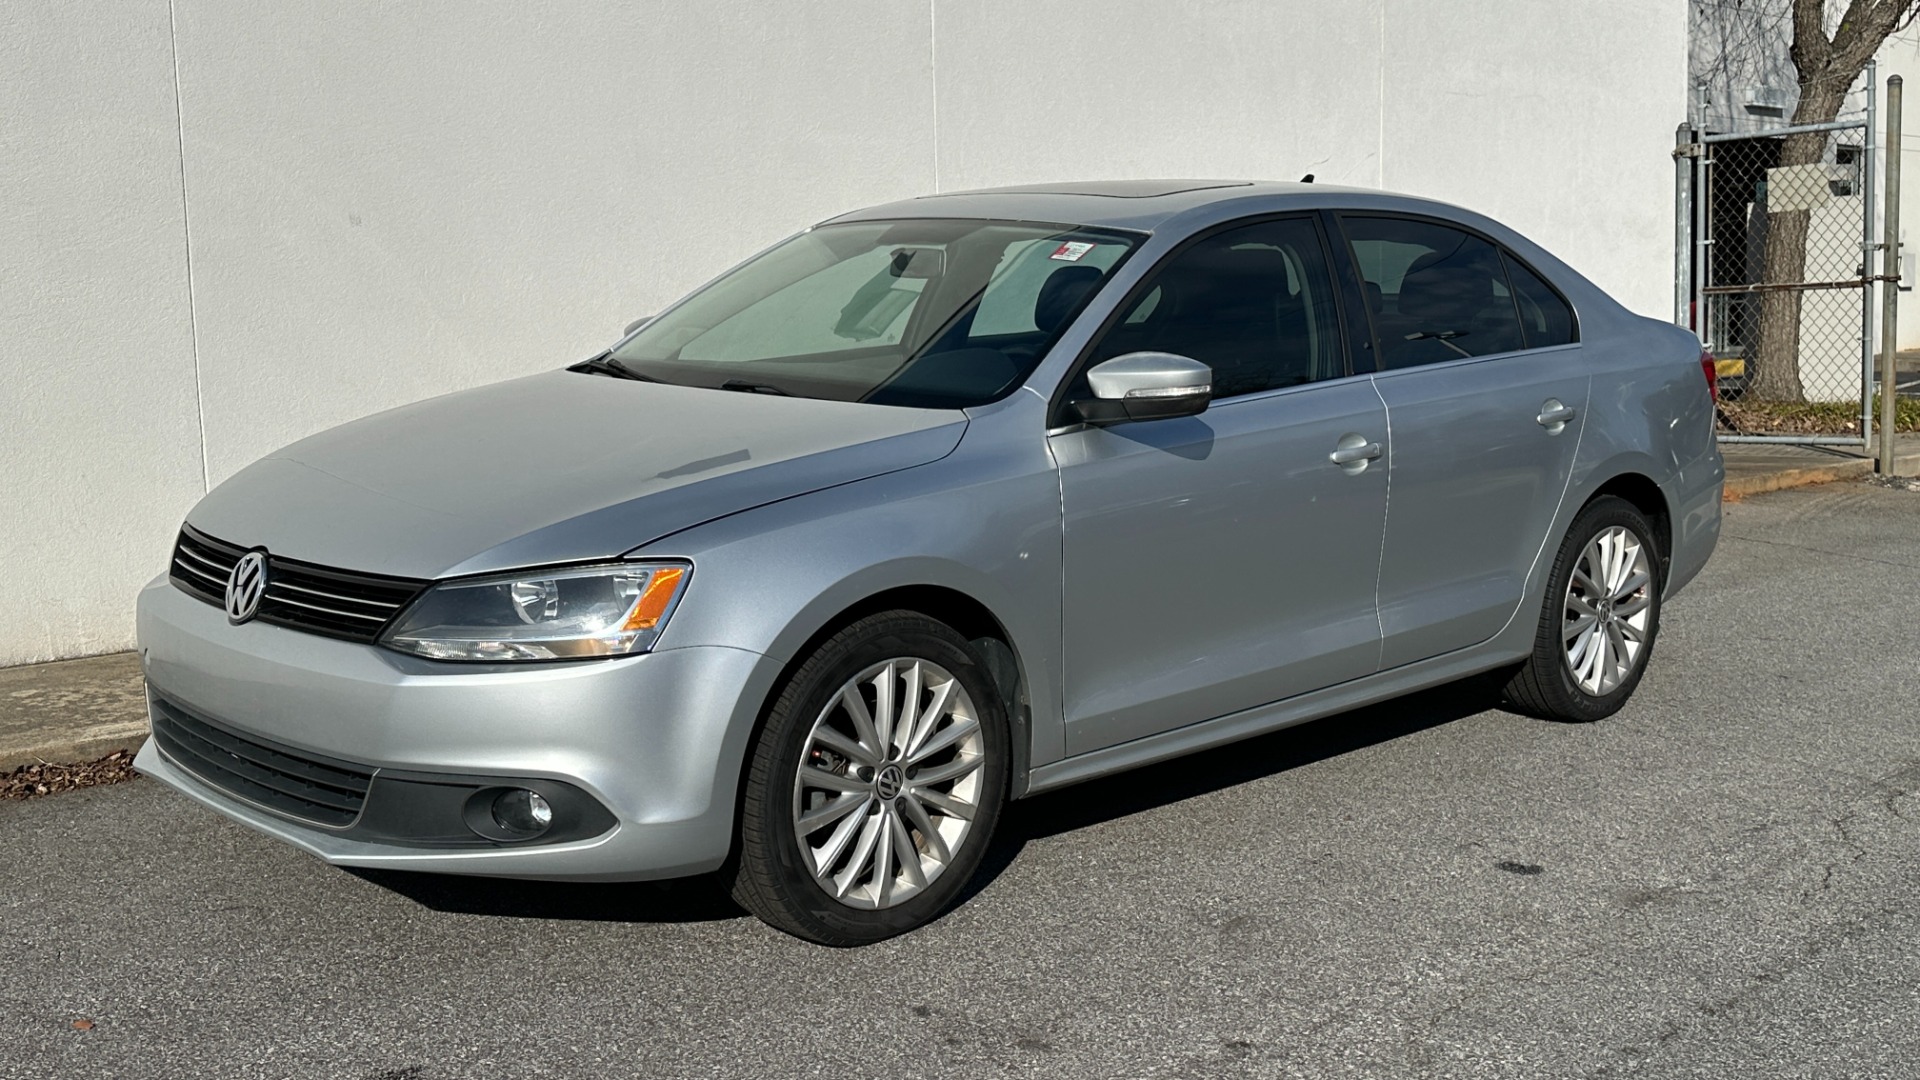 Used 2011 Volkswagen Jetta Sedan SEL / LEATHER / SUNROOF / BLUETOOTH for sale Sold at Formula Imports in Charlotte NC 28227 2